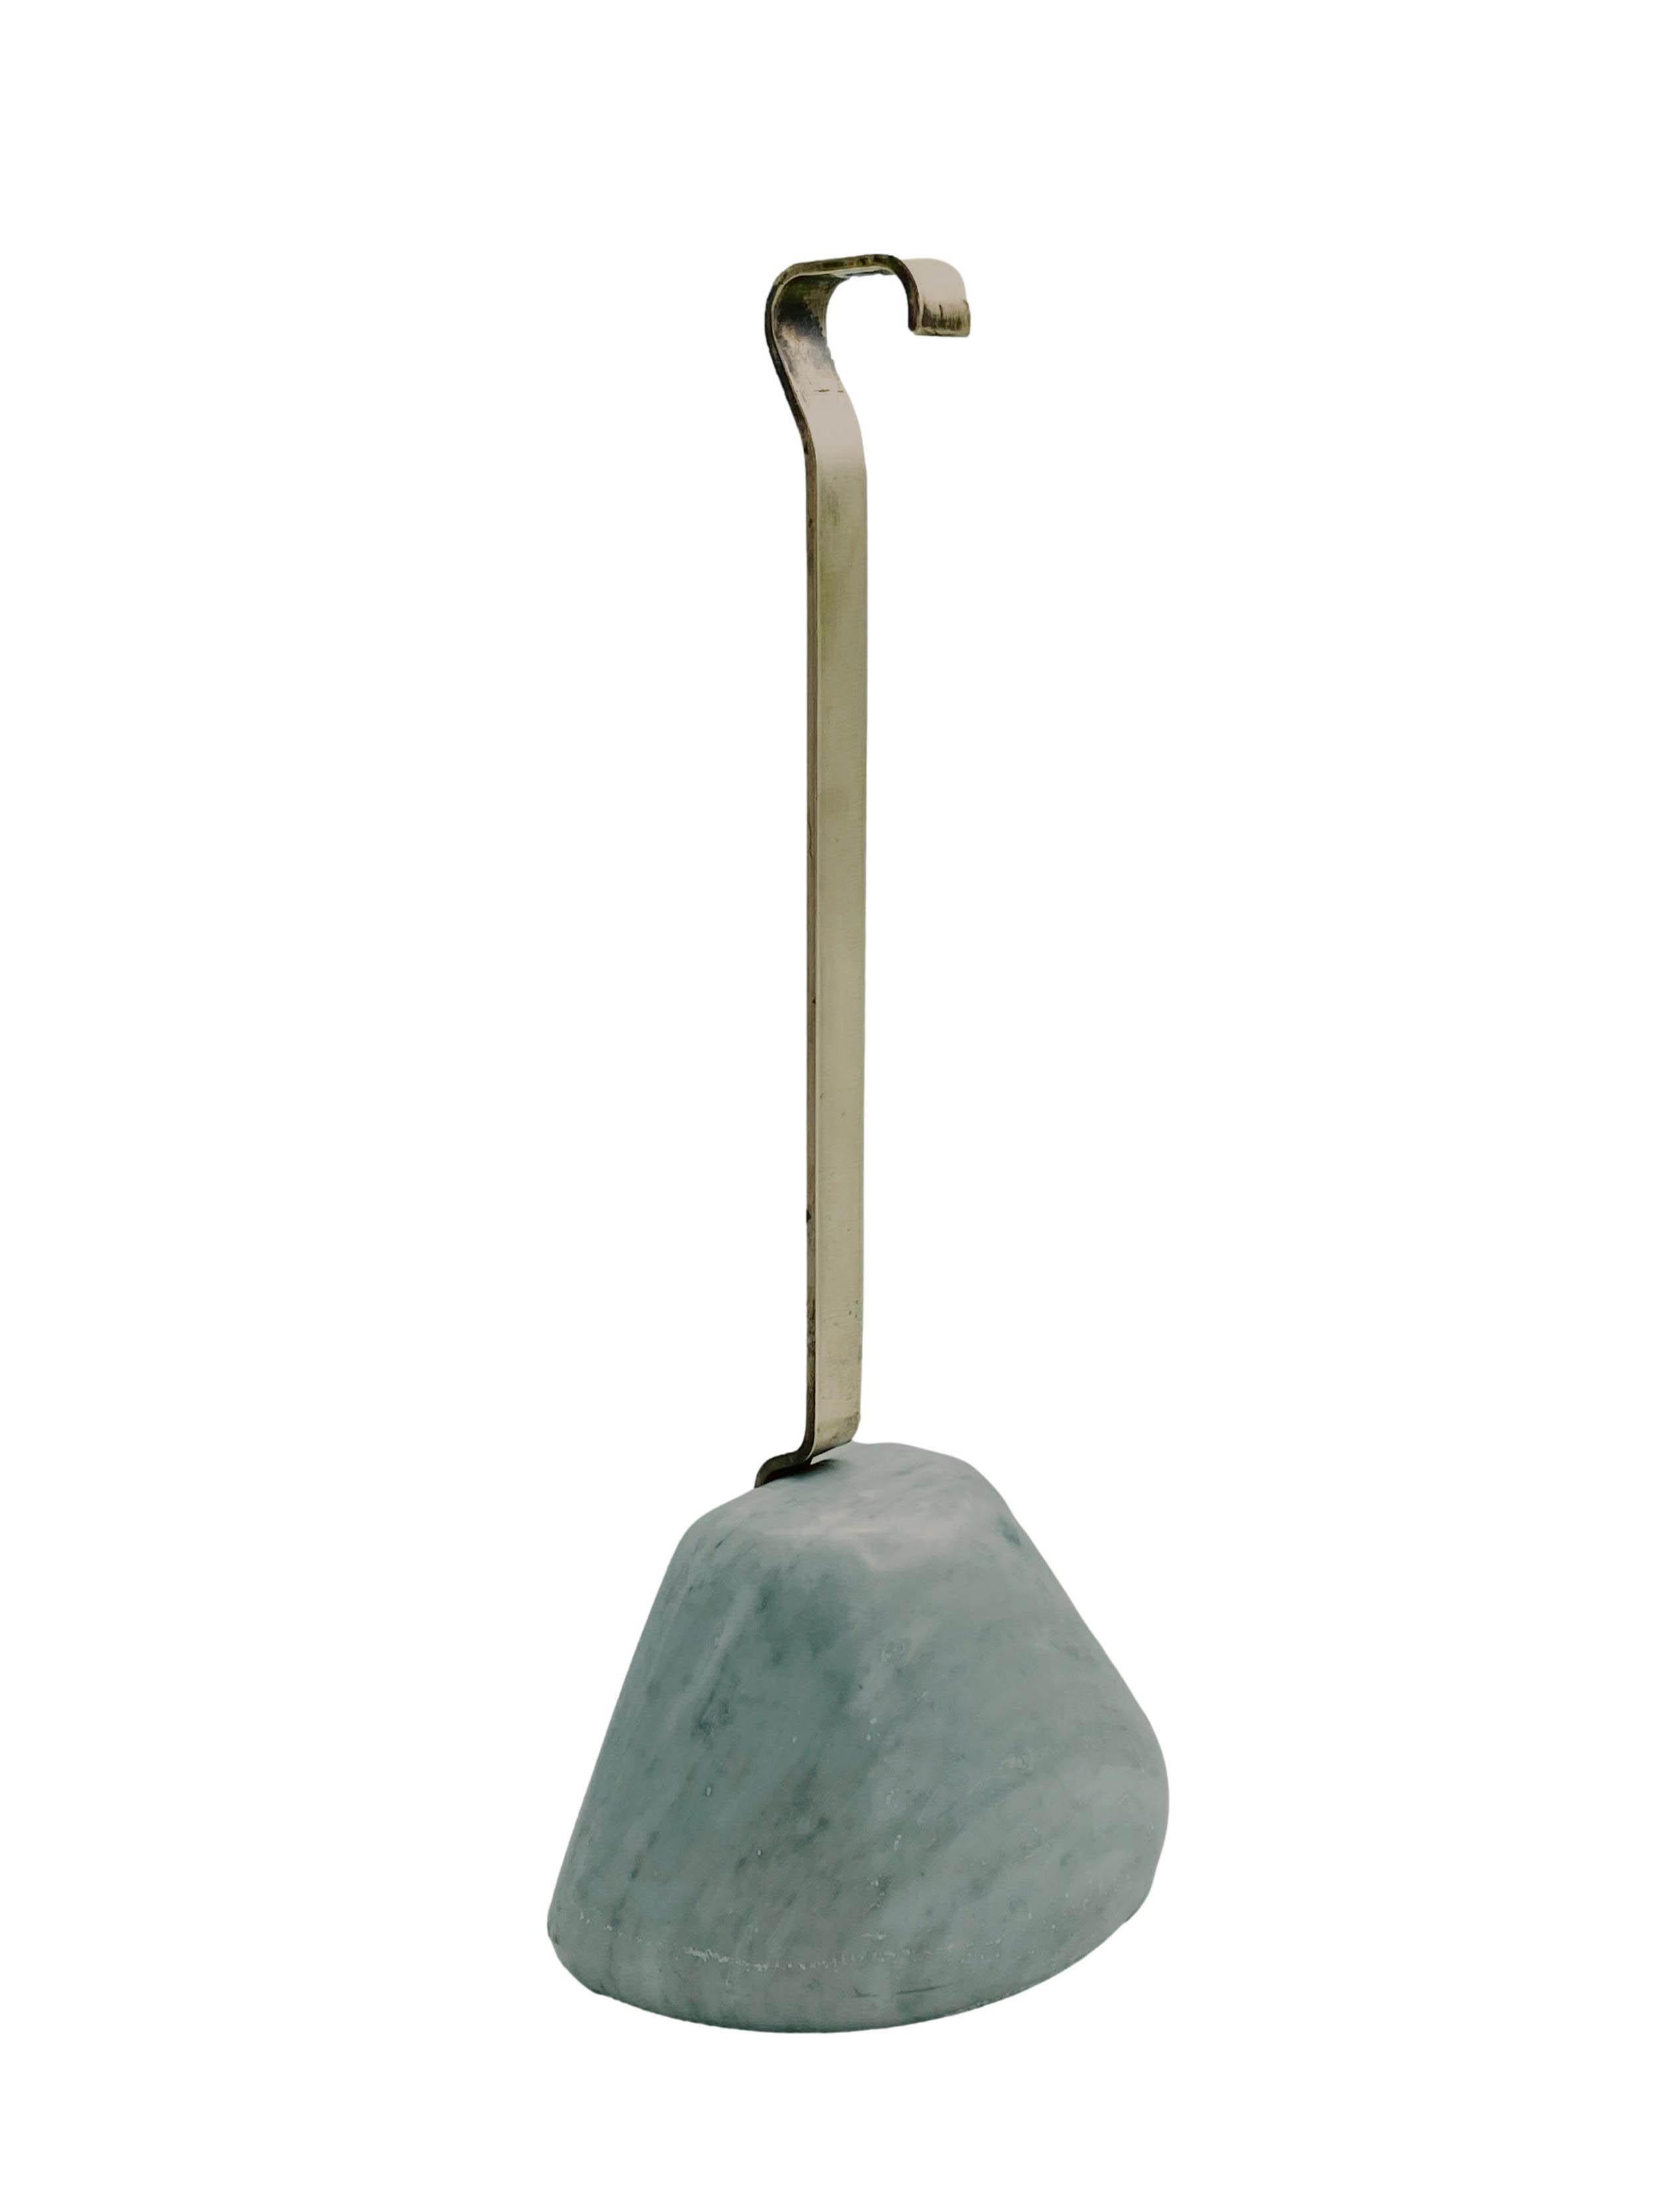 Luigi Caccia Dominioni doorstop for Azucena, with a brass handle on a grey marble base. 1960.